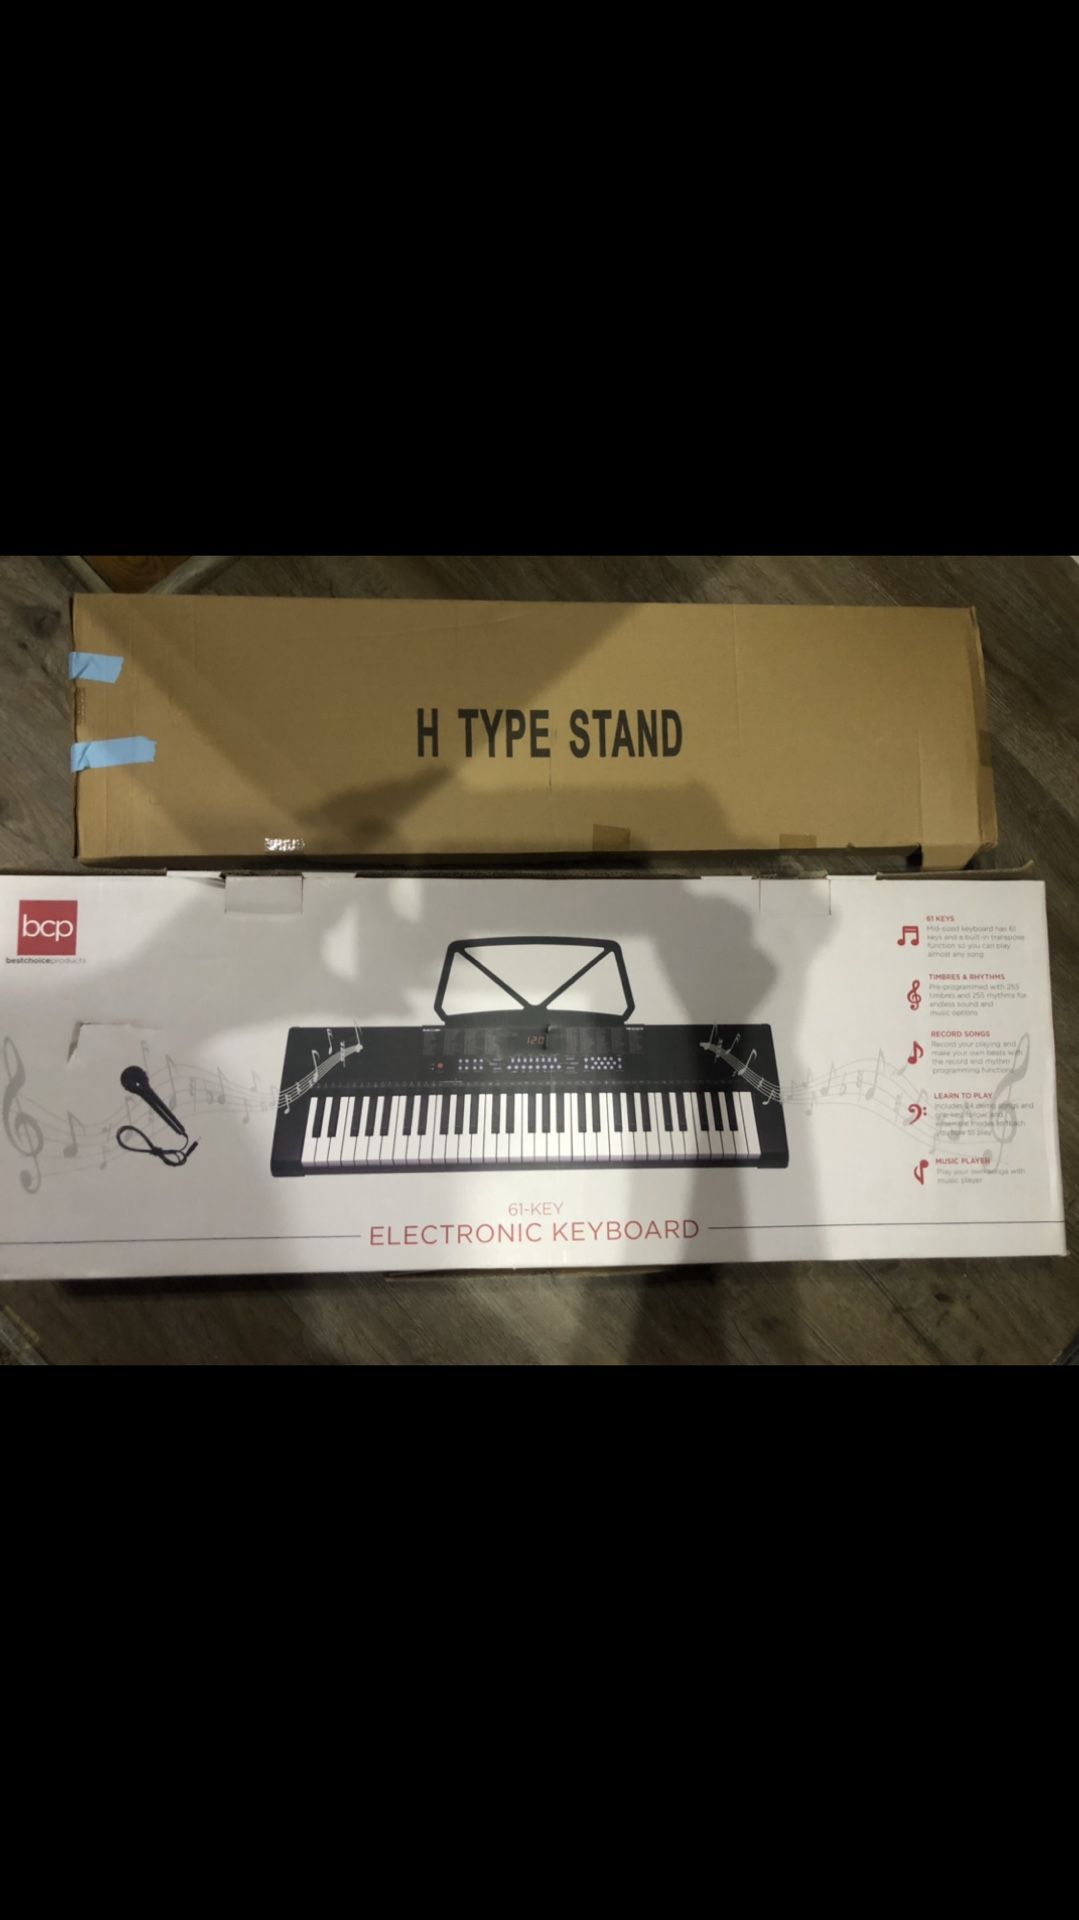 Piano Keyboard With Stand Like New